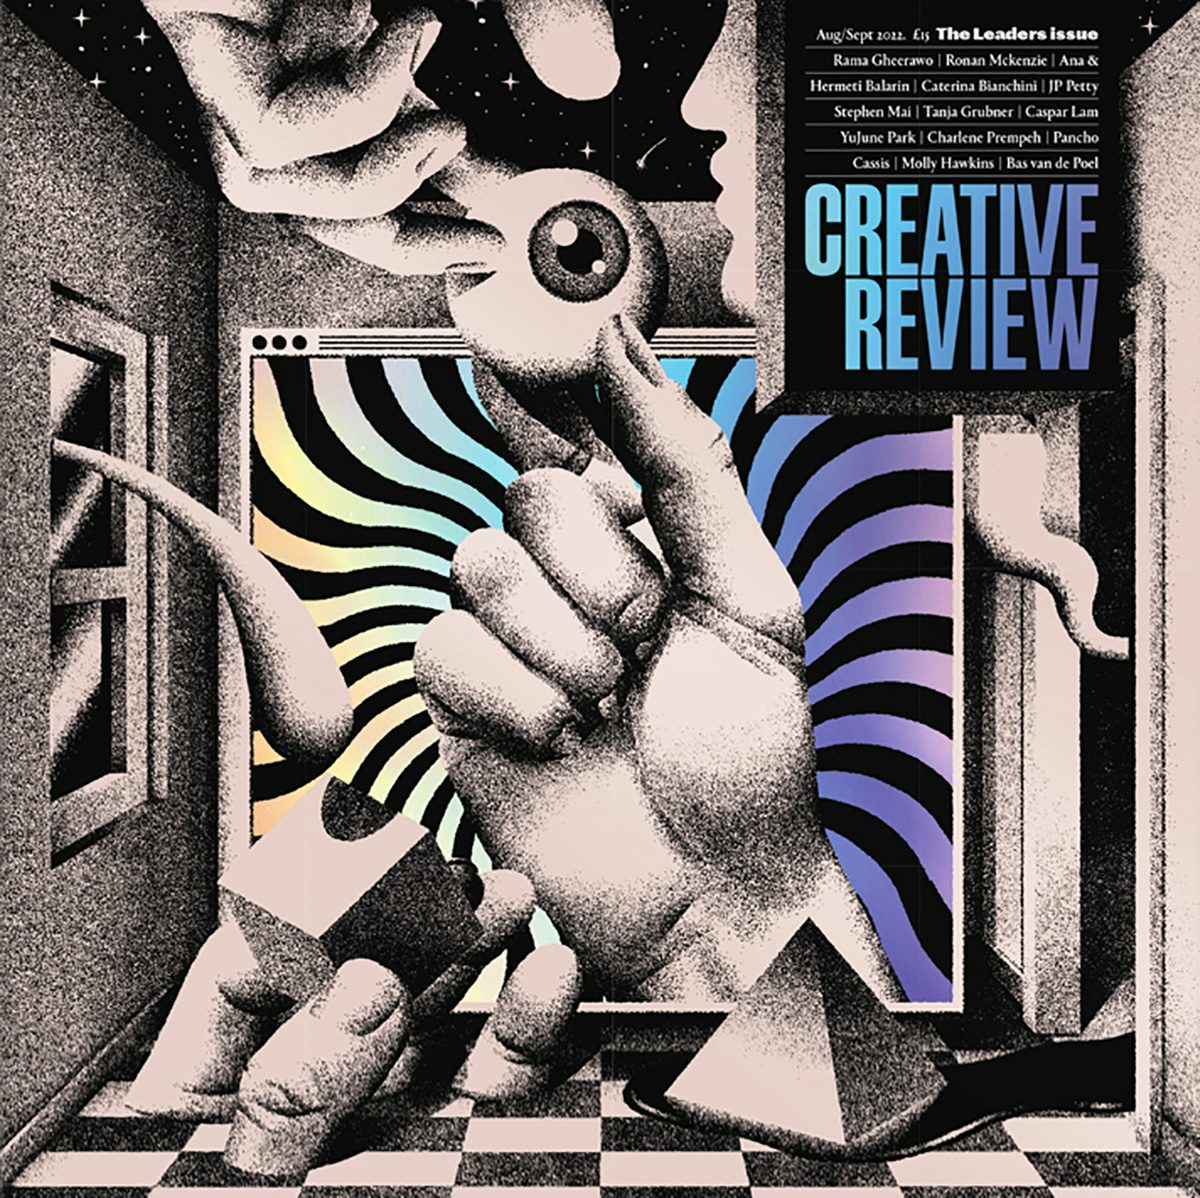 Image of the Creative Review Leaders Issue 2022 magazine cover featuring a black and white surreal design